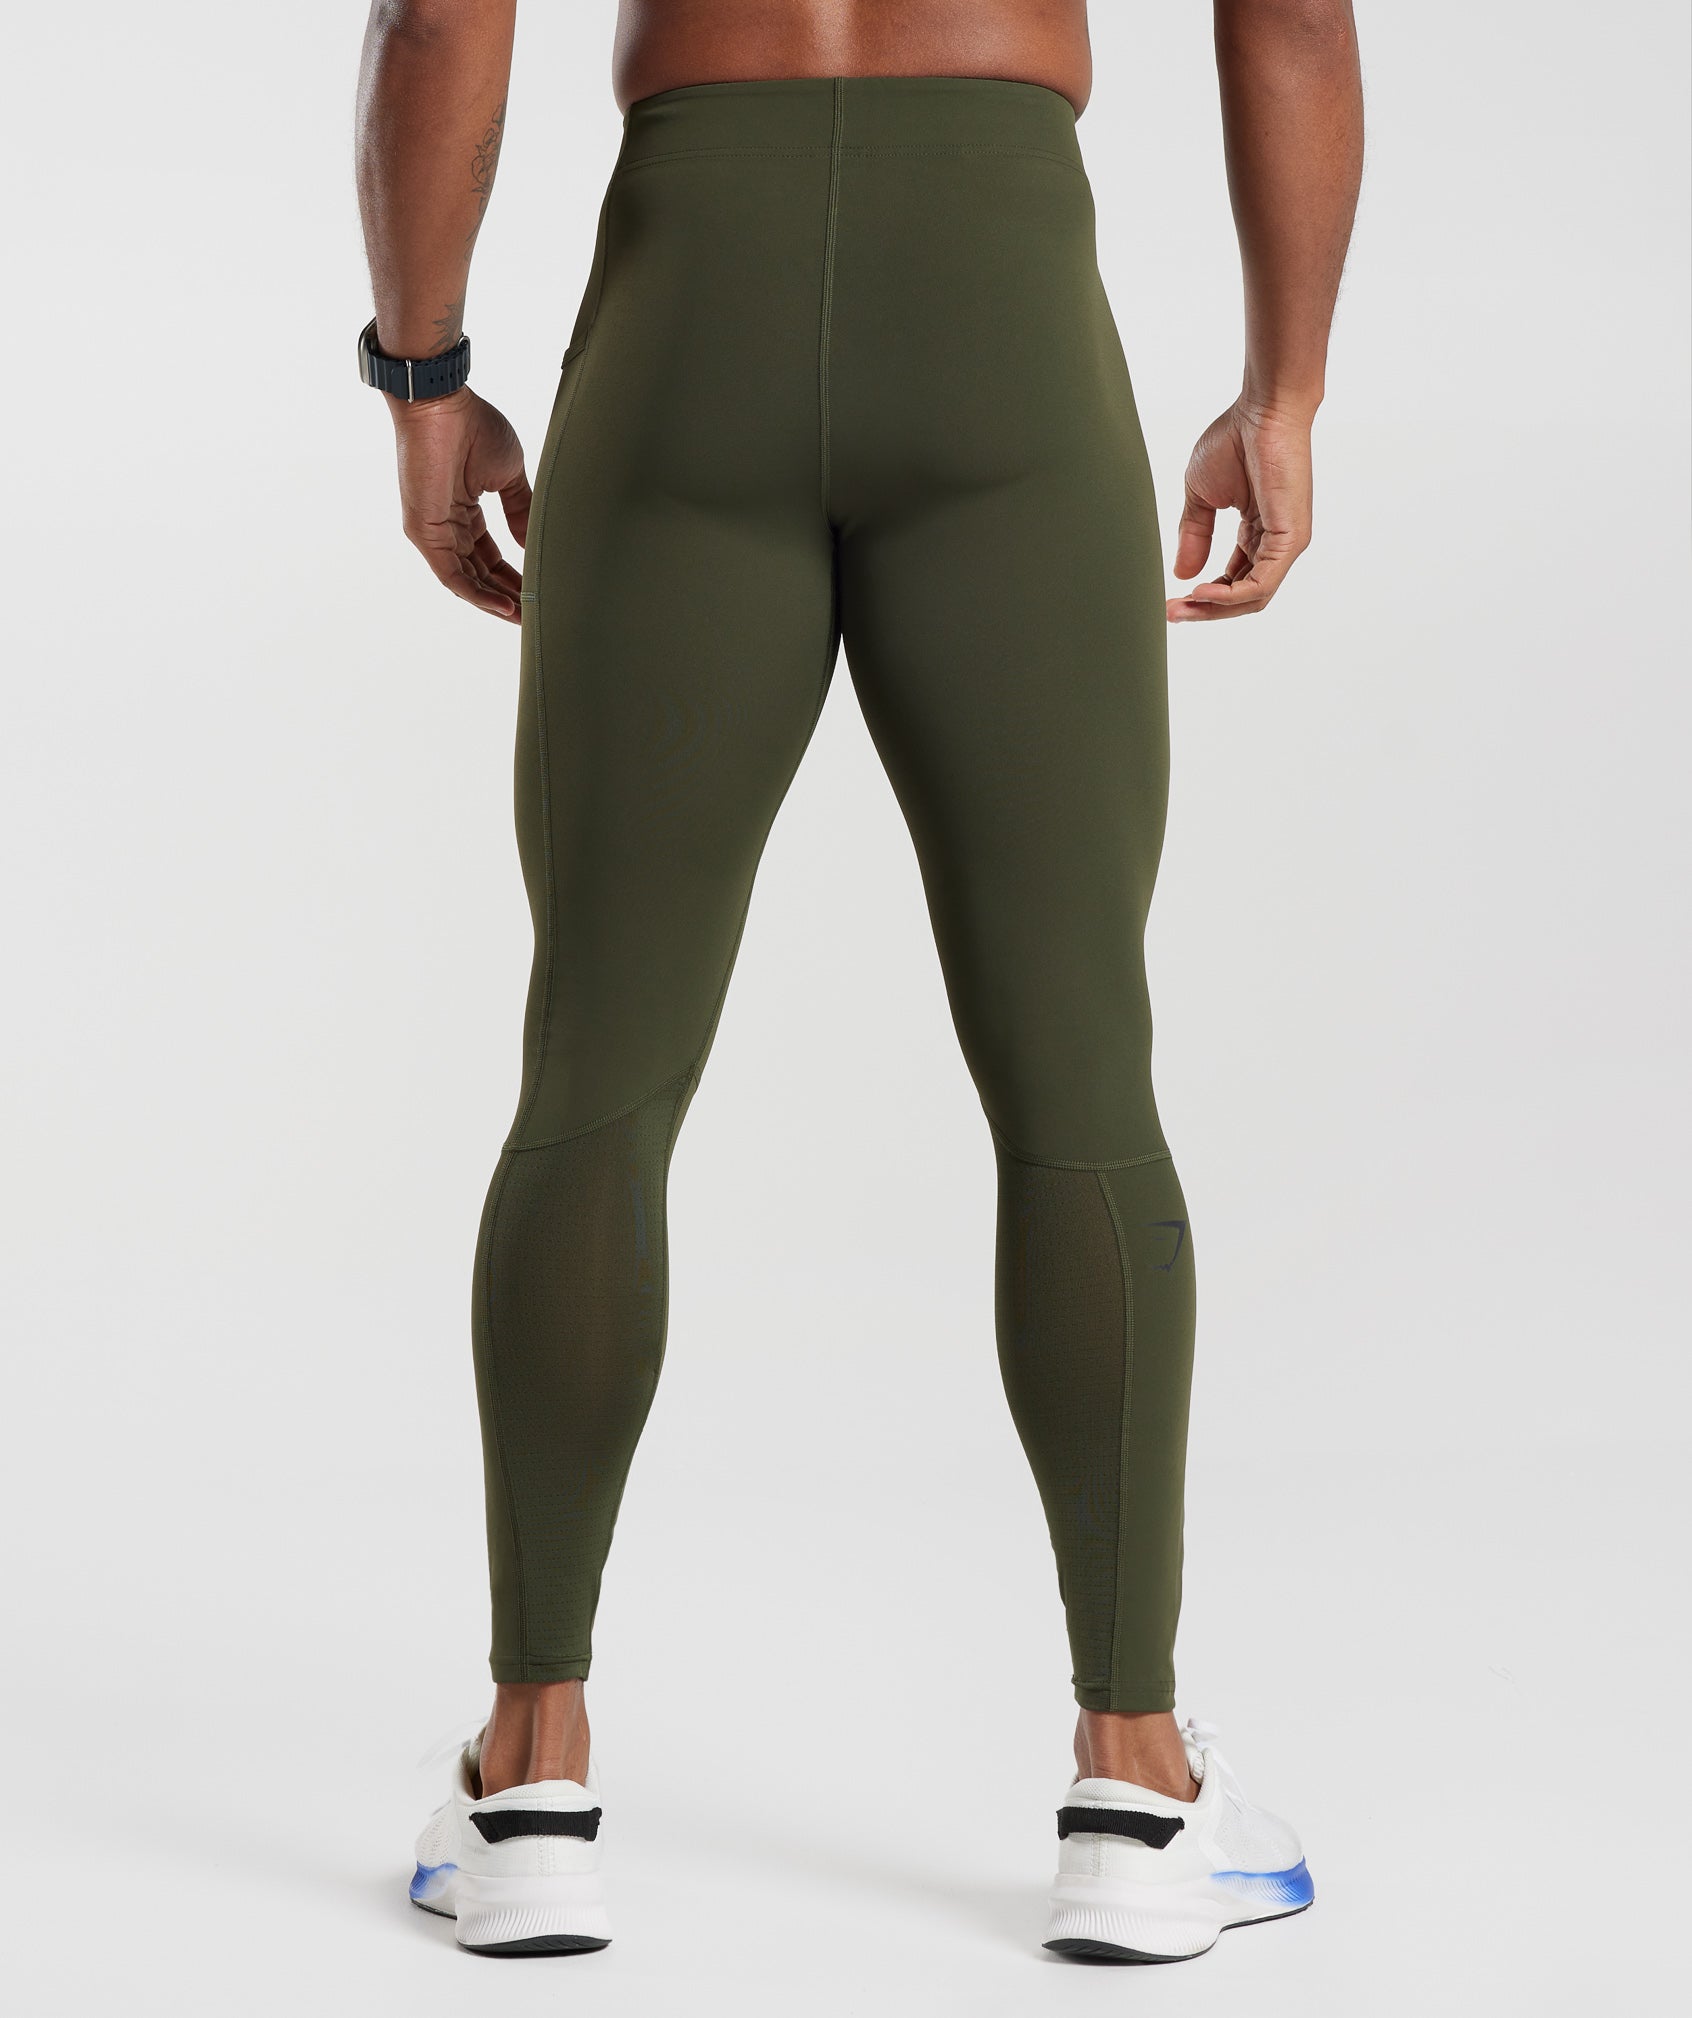 Control Baselayer Leggings in Winter Olive - view 2